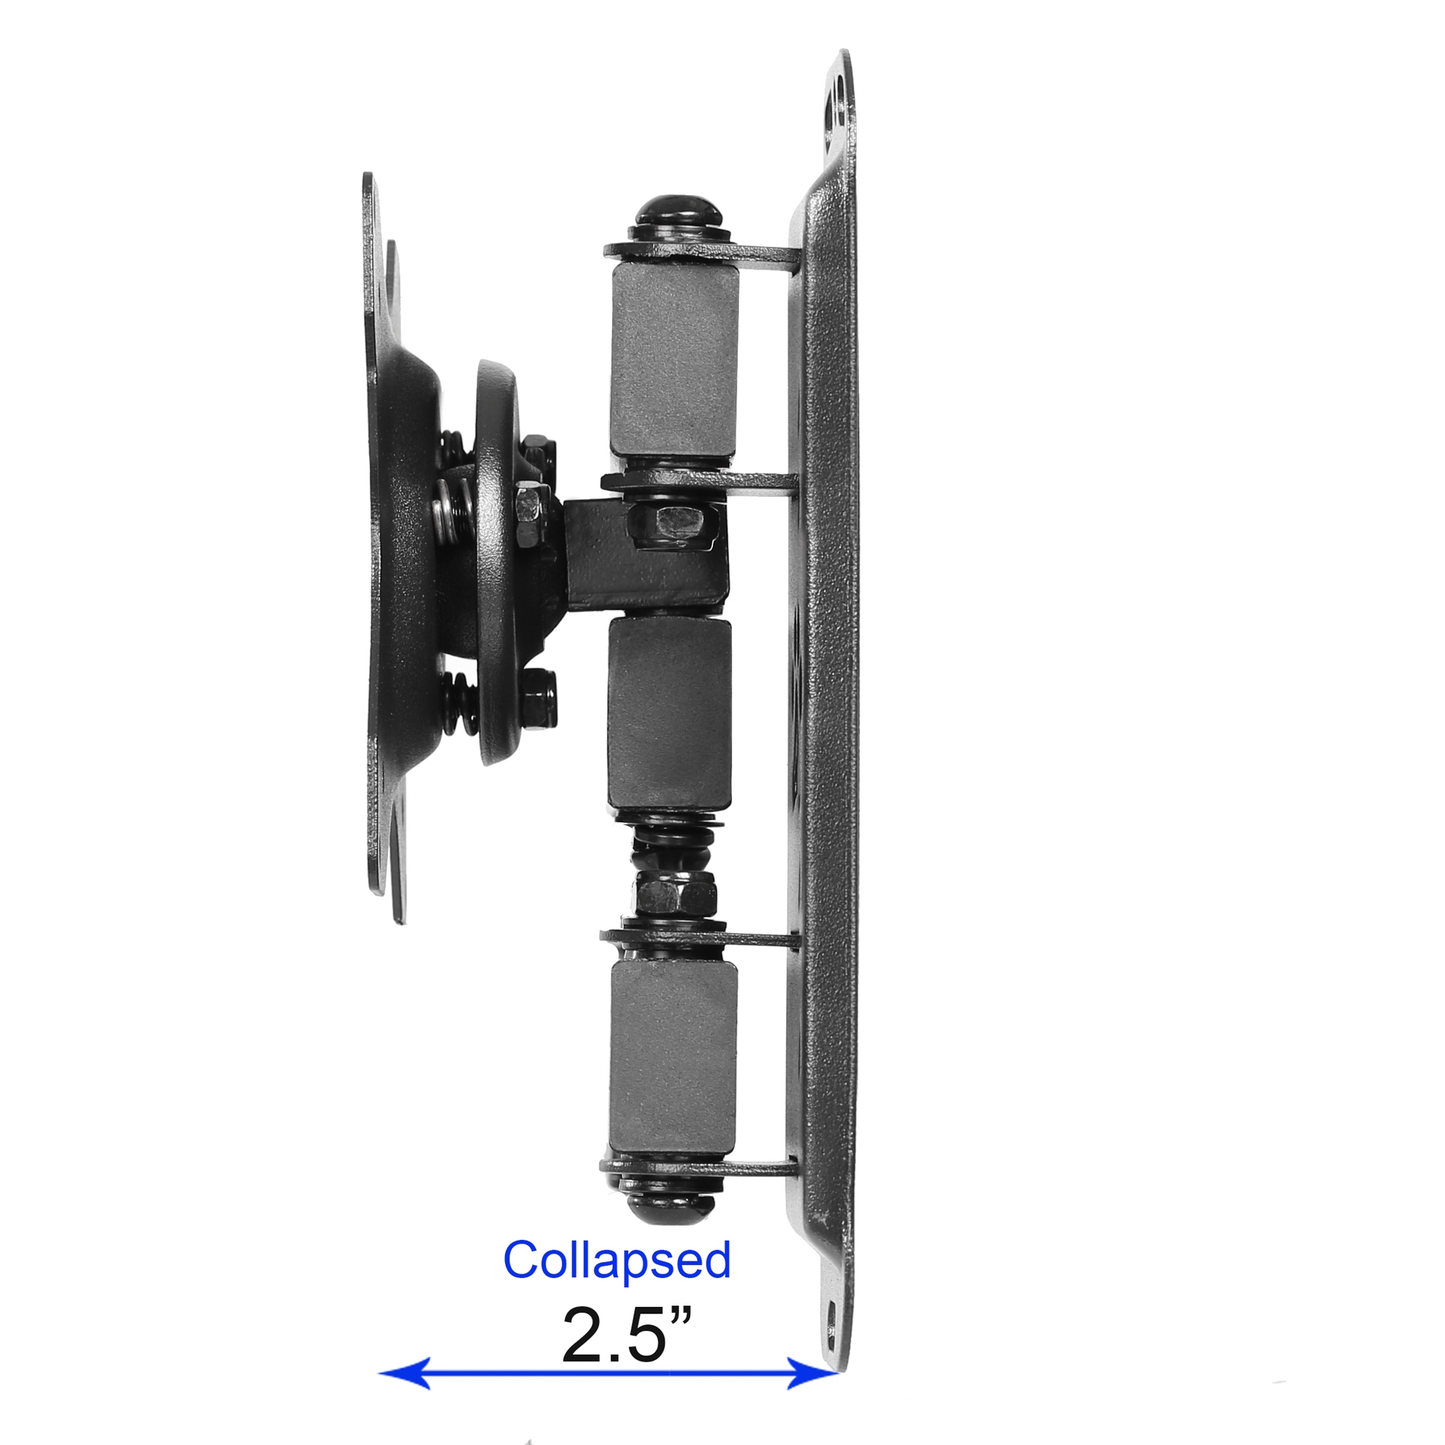 Cheetah Mounts ALAMEB Articulating Arm for 12-37" Displays up to VESA 200 and up to 40lbs